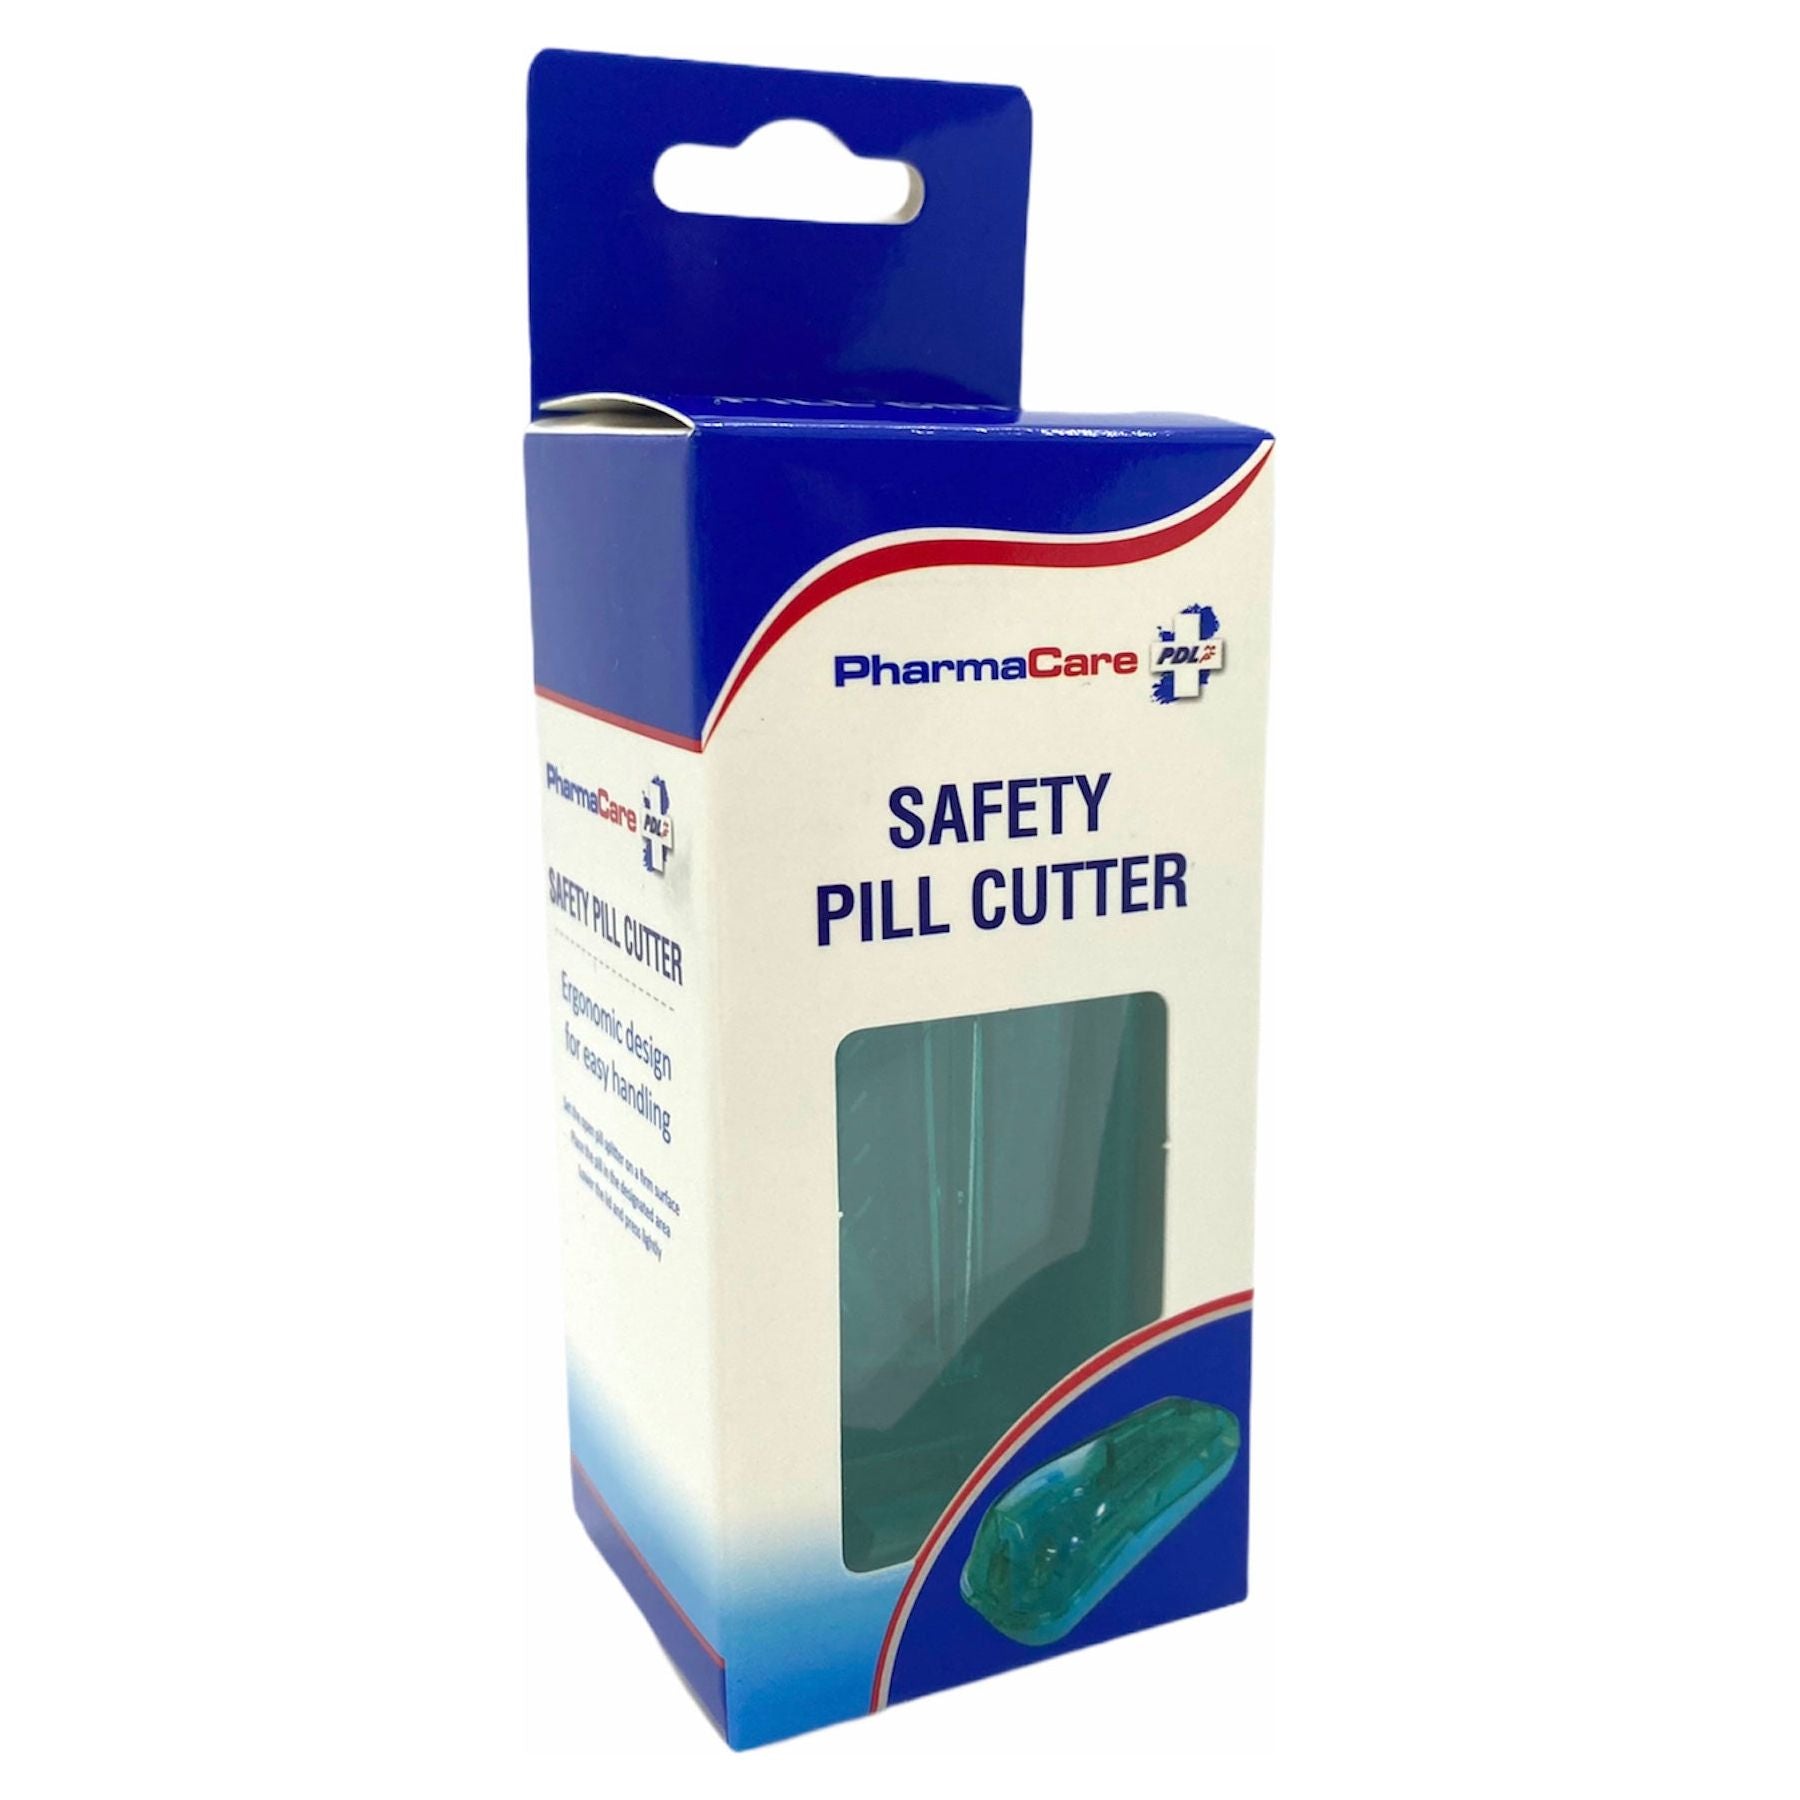 Pharmacare Safety Pill Cutter